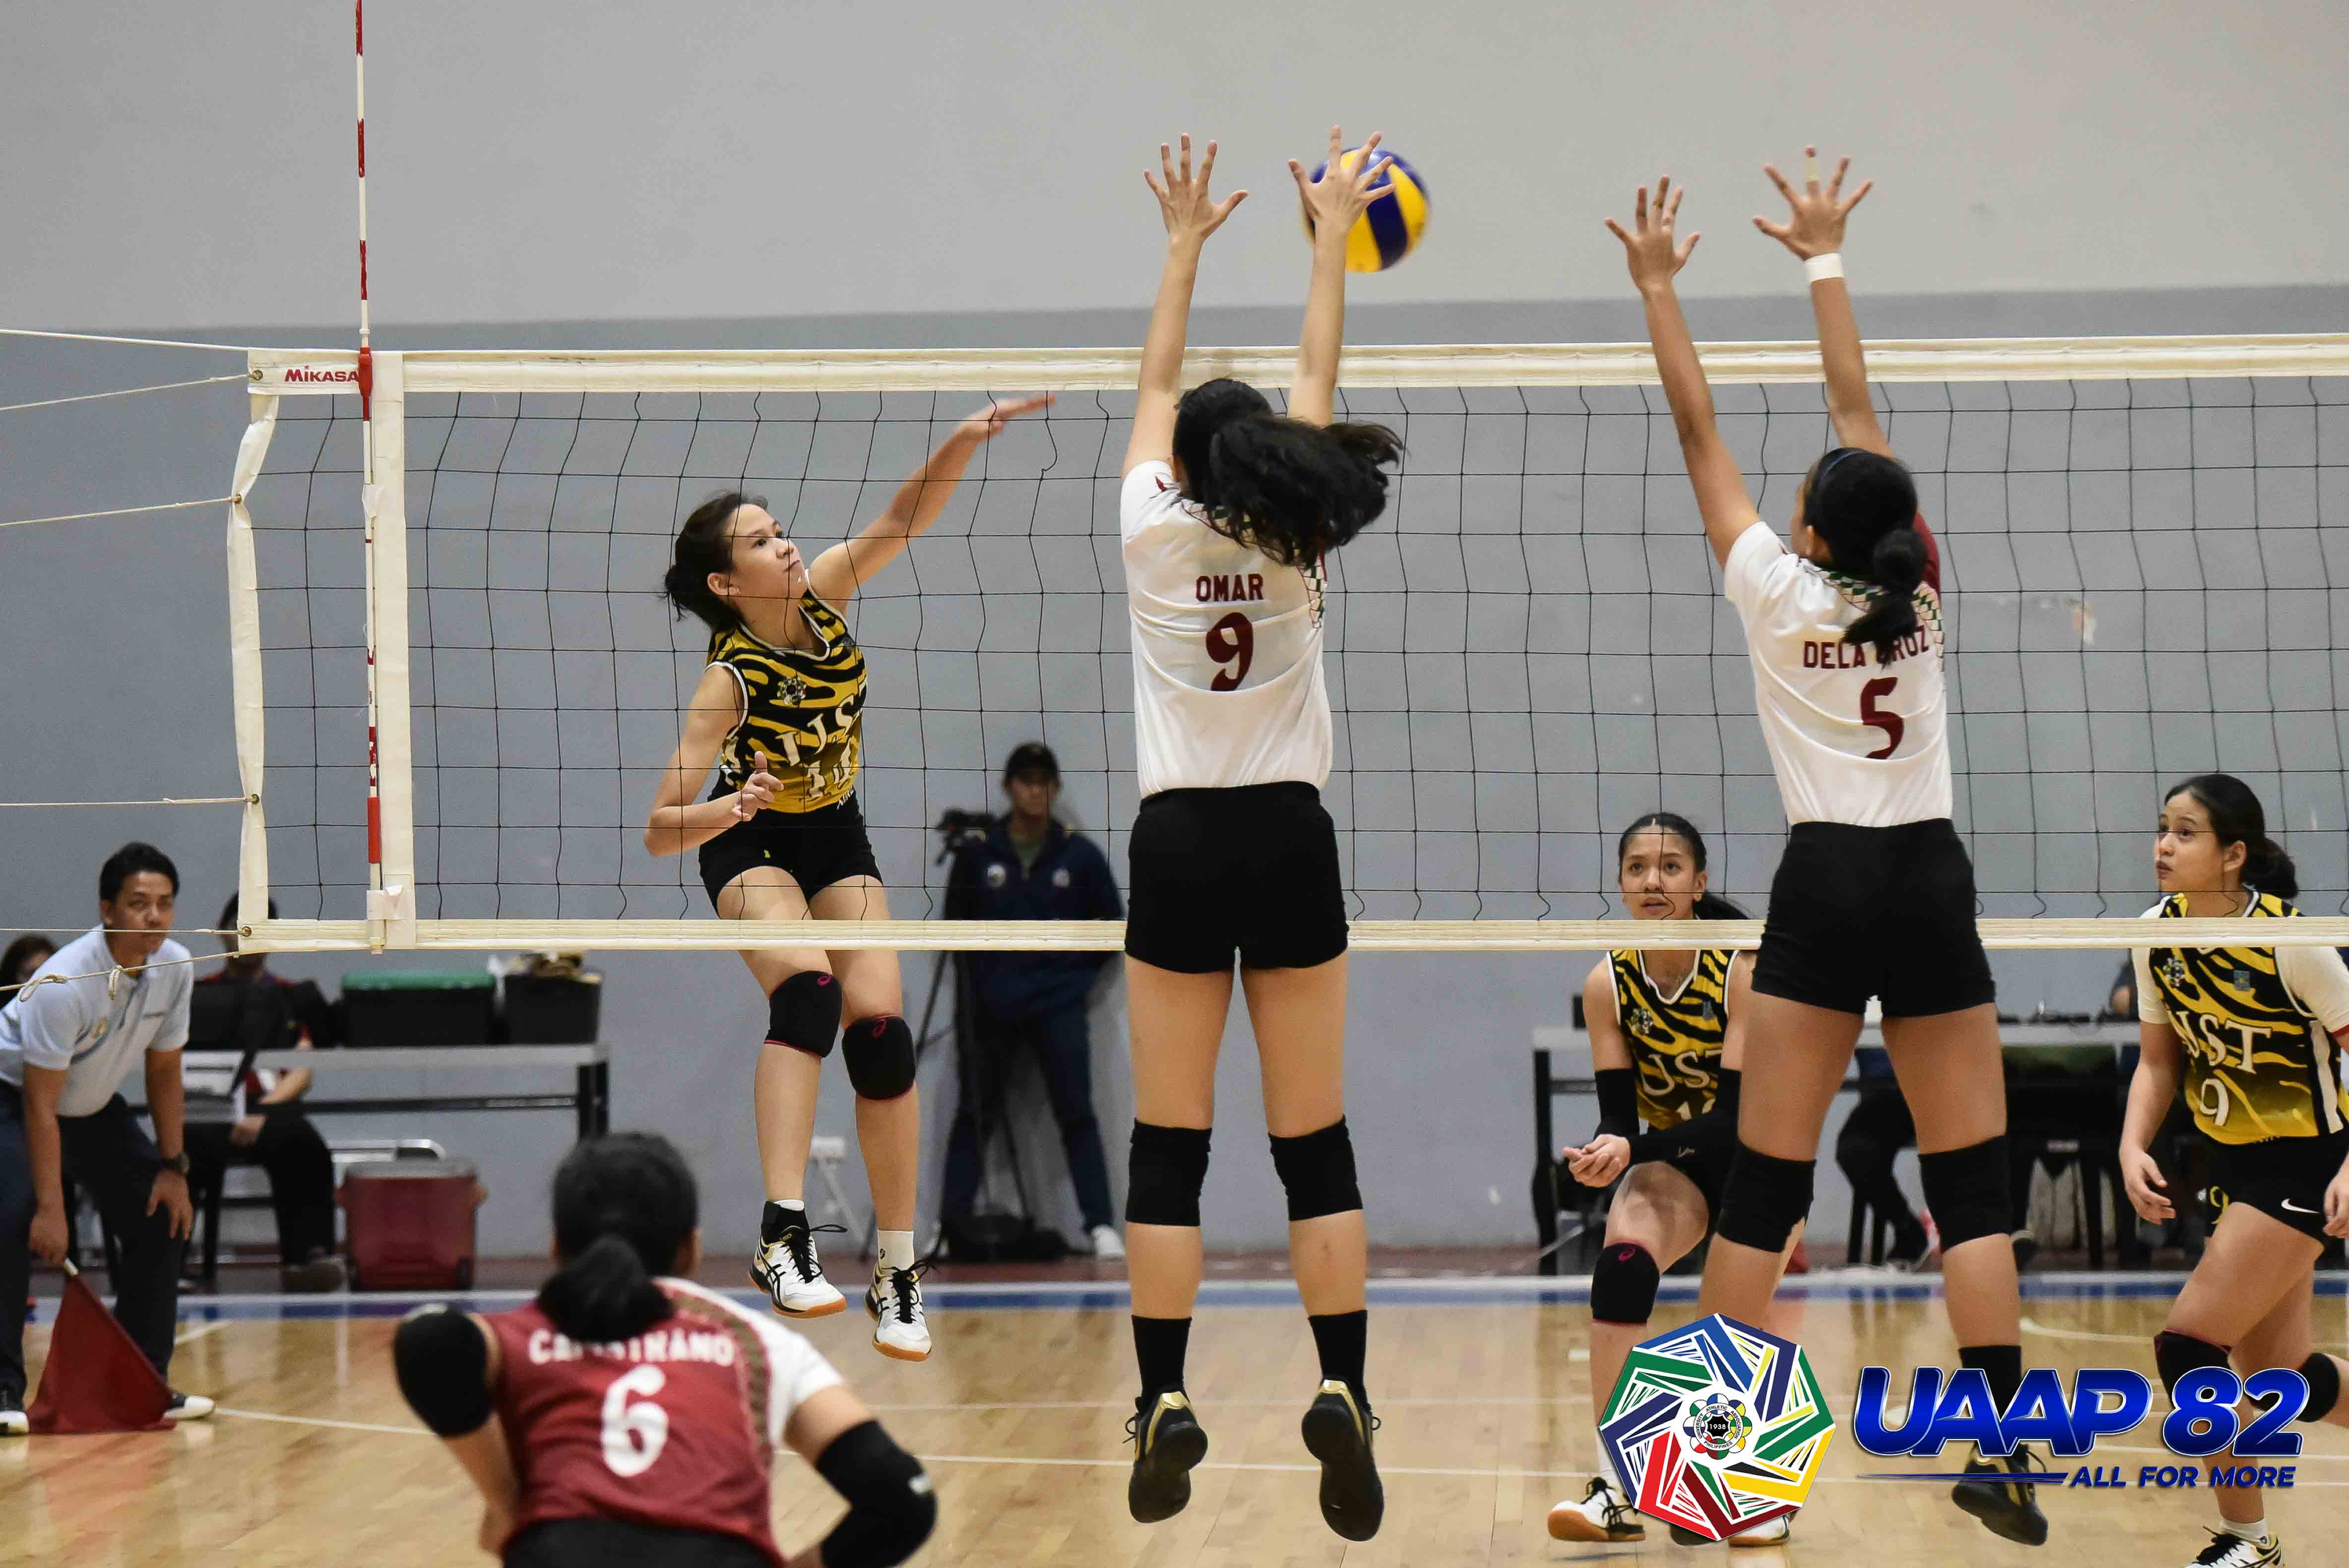 UAAP-82-Girls-Volleyball-UST-vs-UPIS-Regina-Jurado-4 Having faced NU before in HS, Regina Jurado provides spark for UST this time in college News PVL Volleyball  - philippine sports news